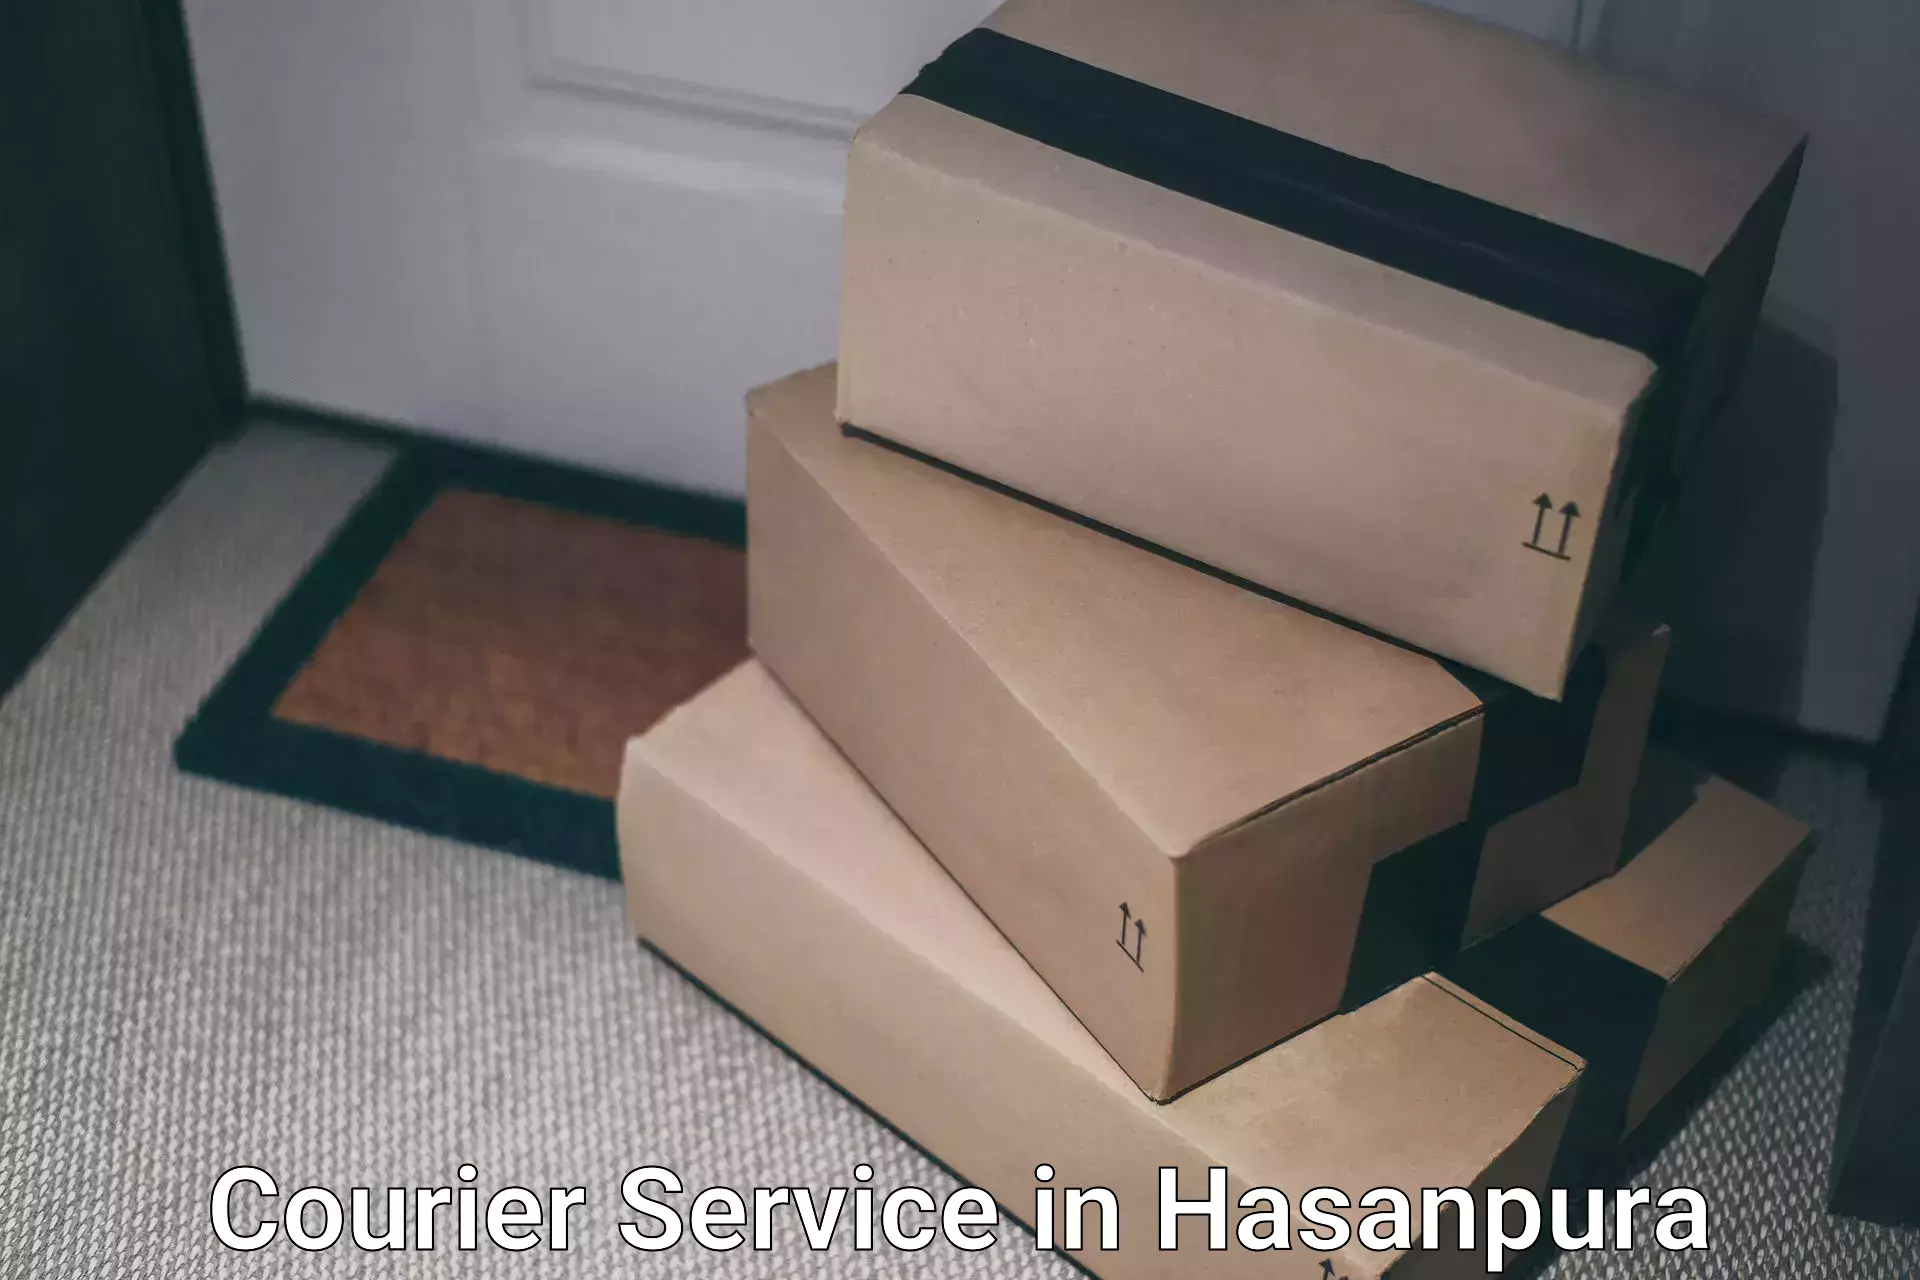 On-demand shipping options in Hasanpura